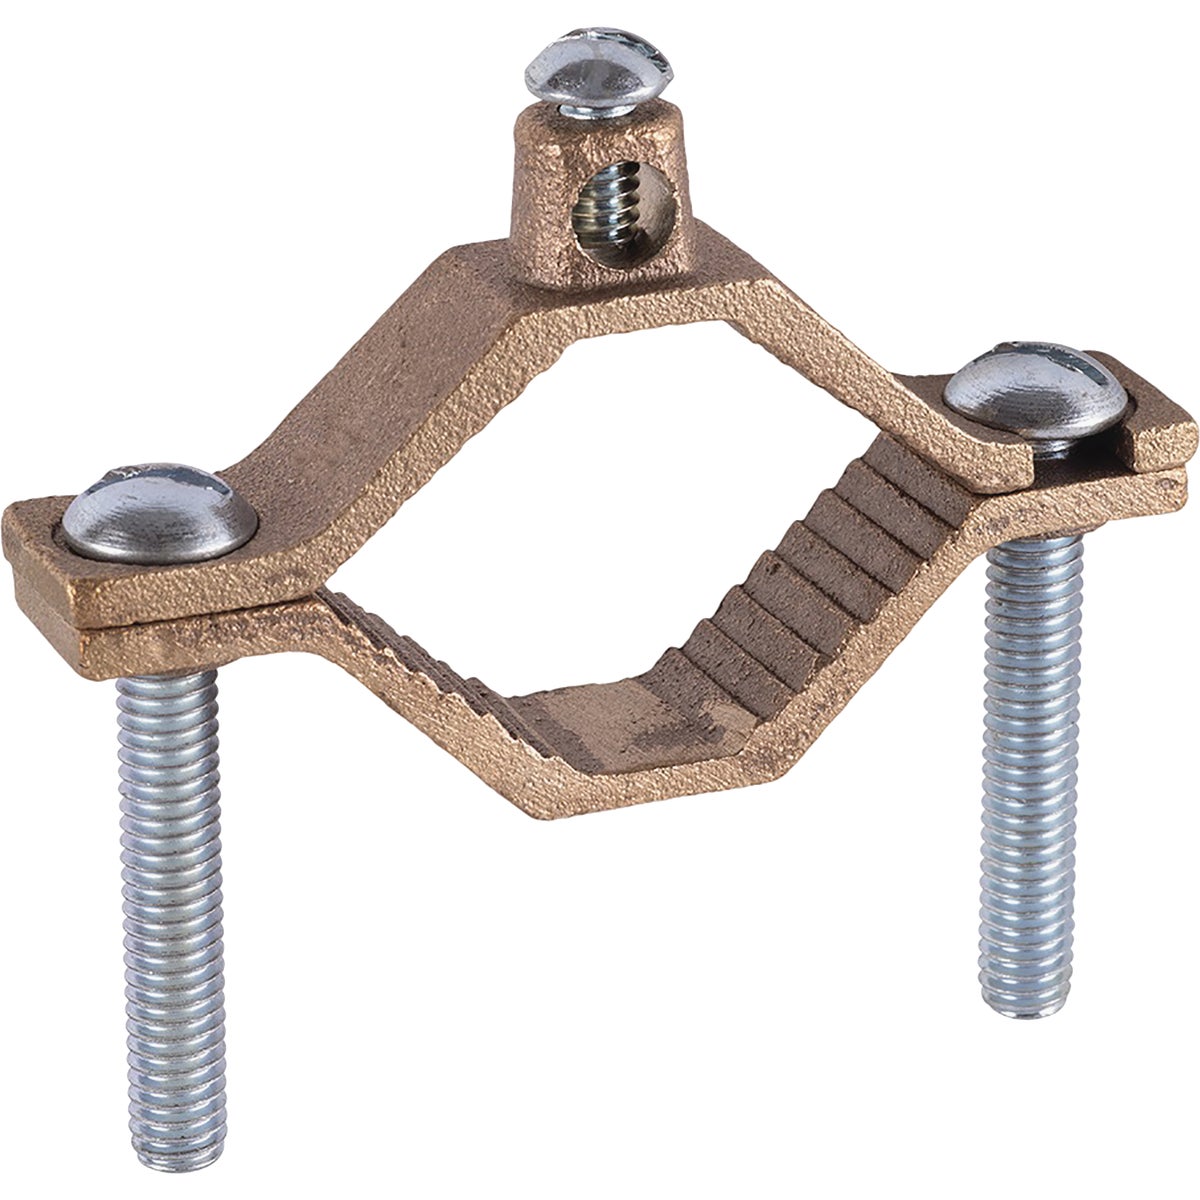 Item 510389, Set screw type serrated clamp that swings apart for easy installation.